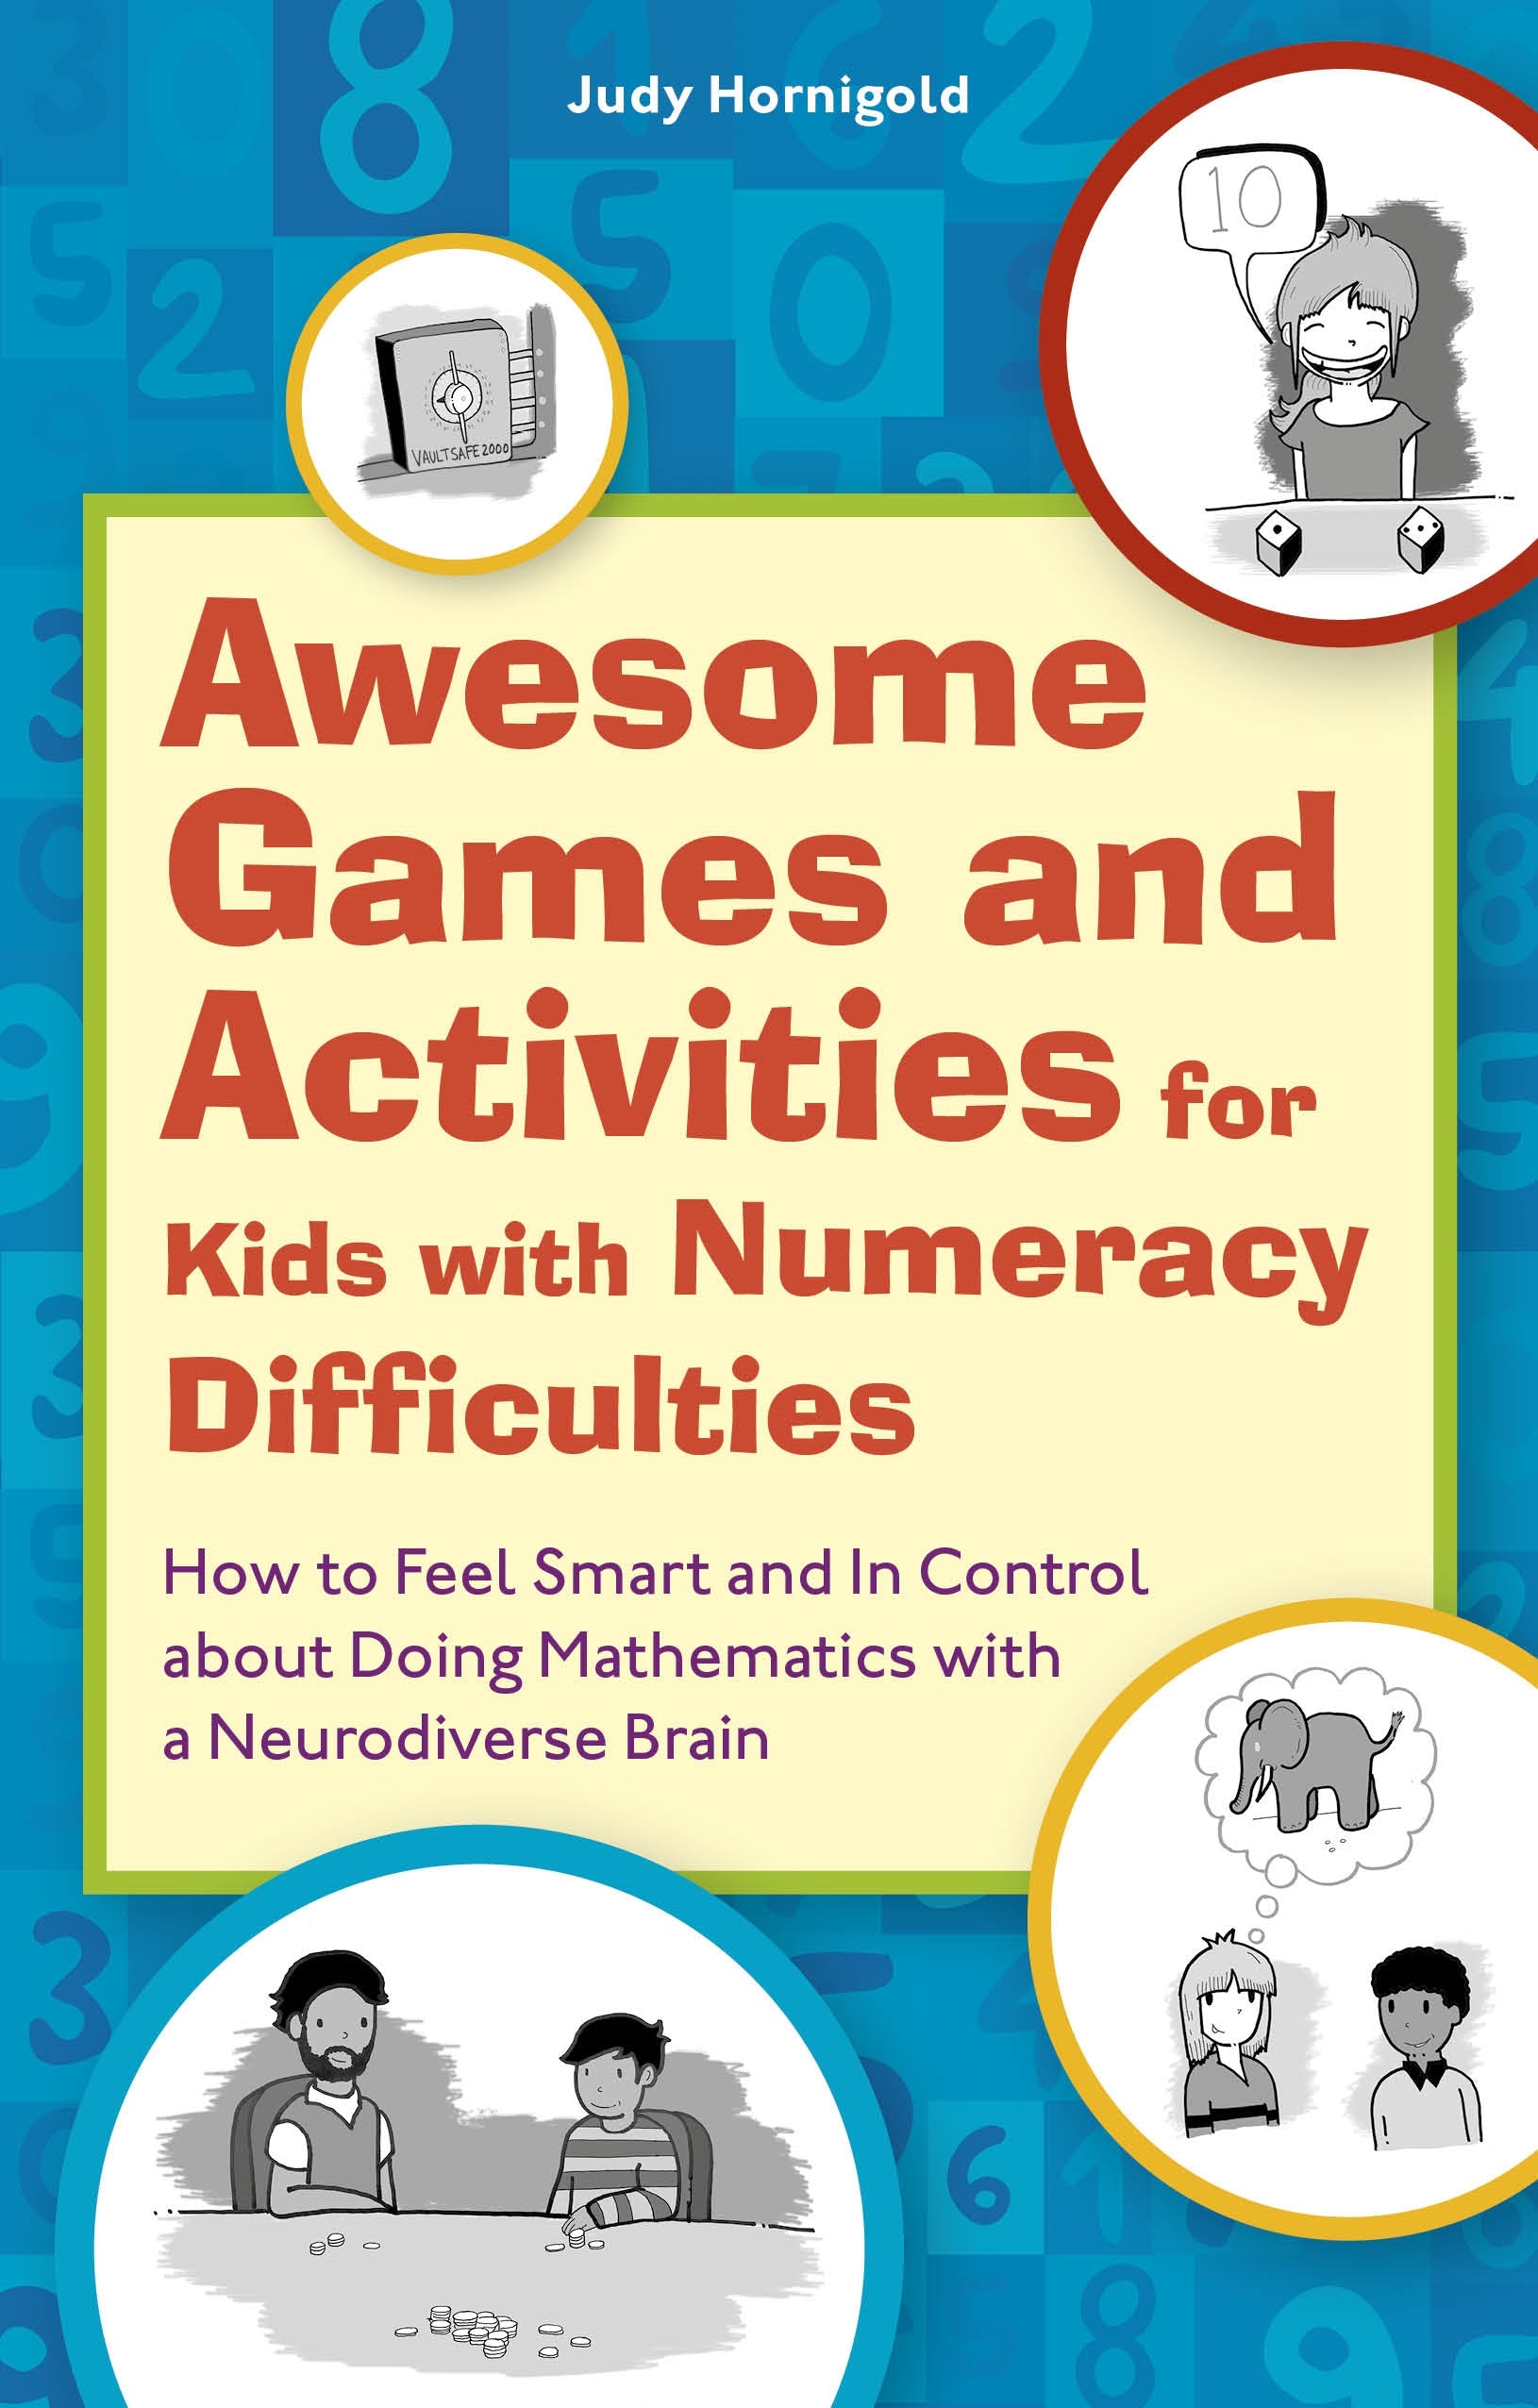 Awesome Games and Activities for Kids with Numeracy Difficulties by Joe Salerno, Judy Hornigold